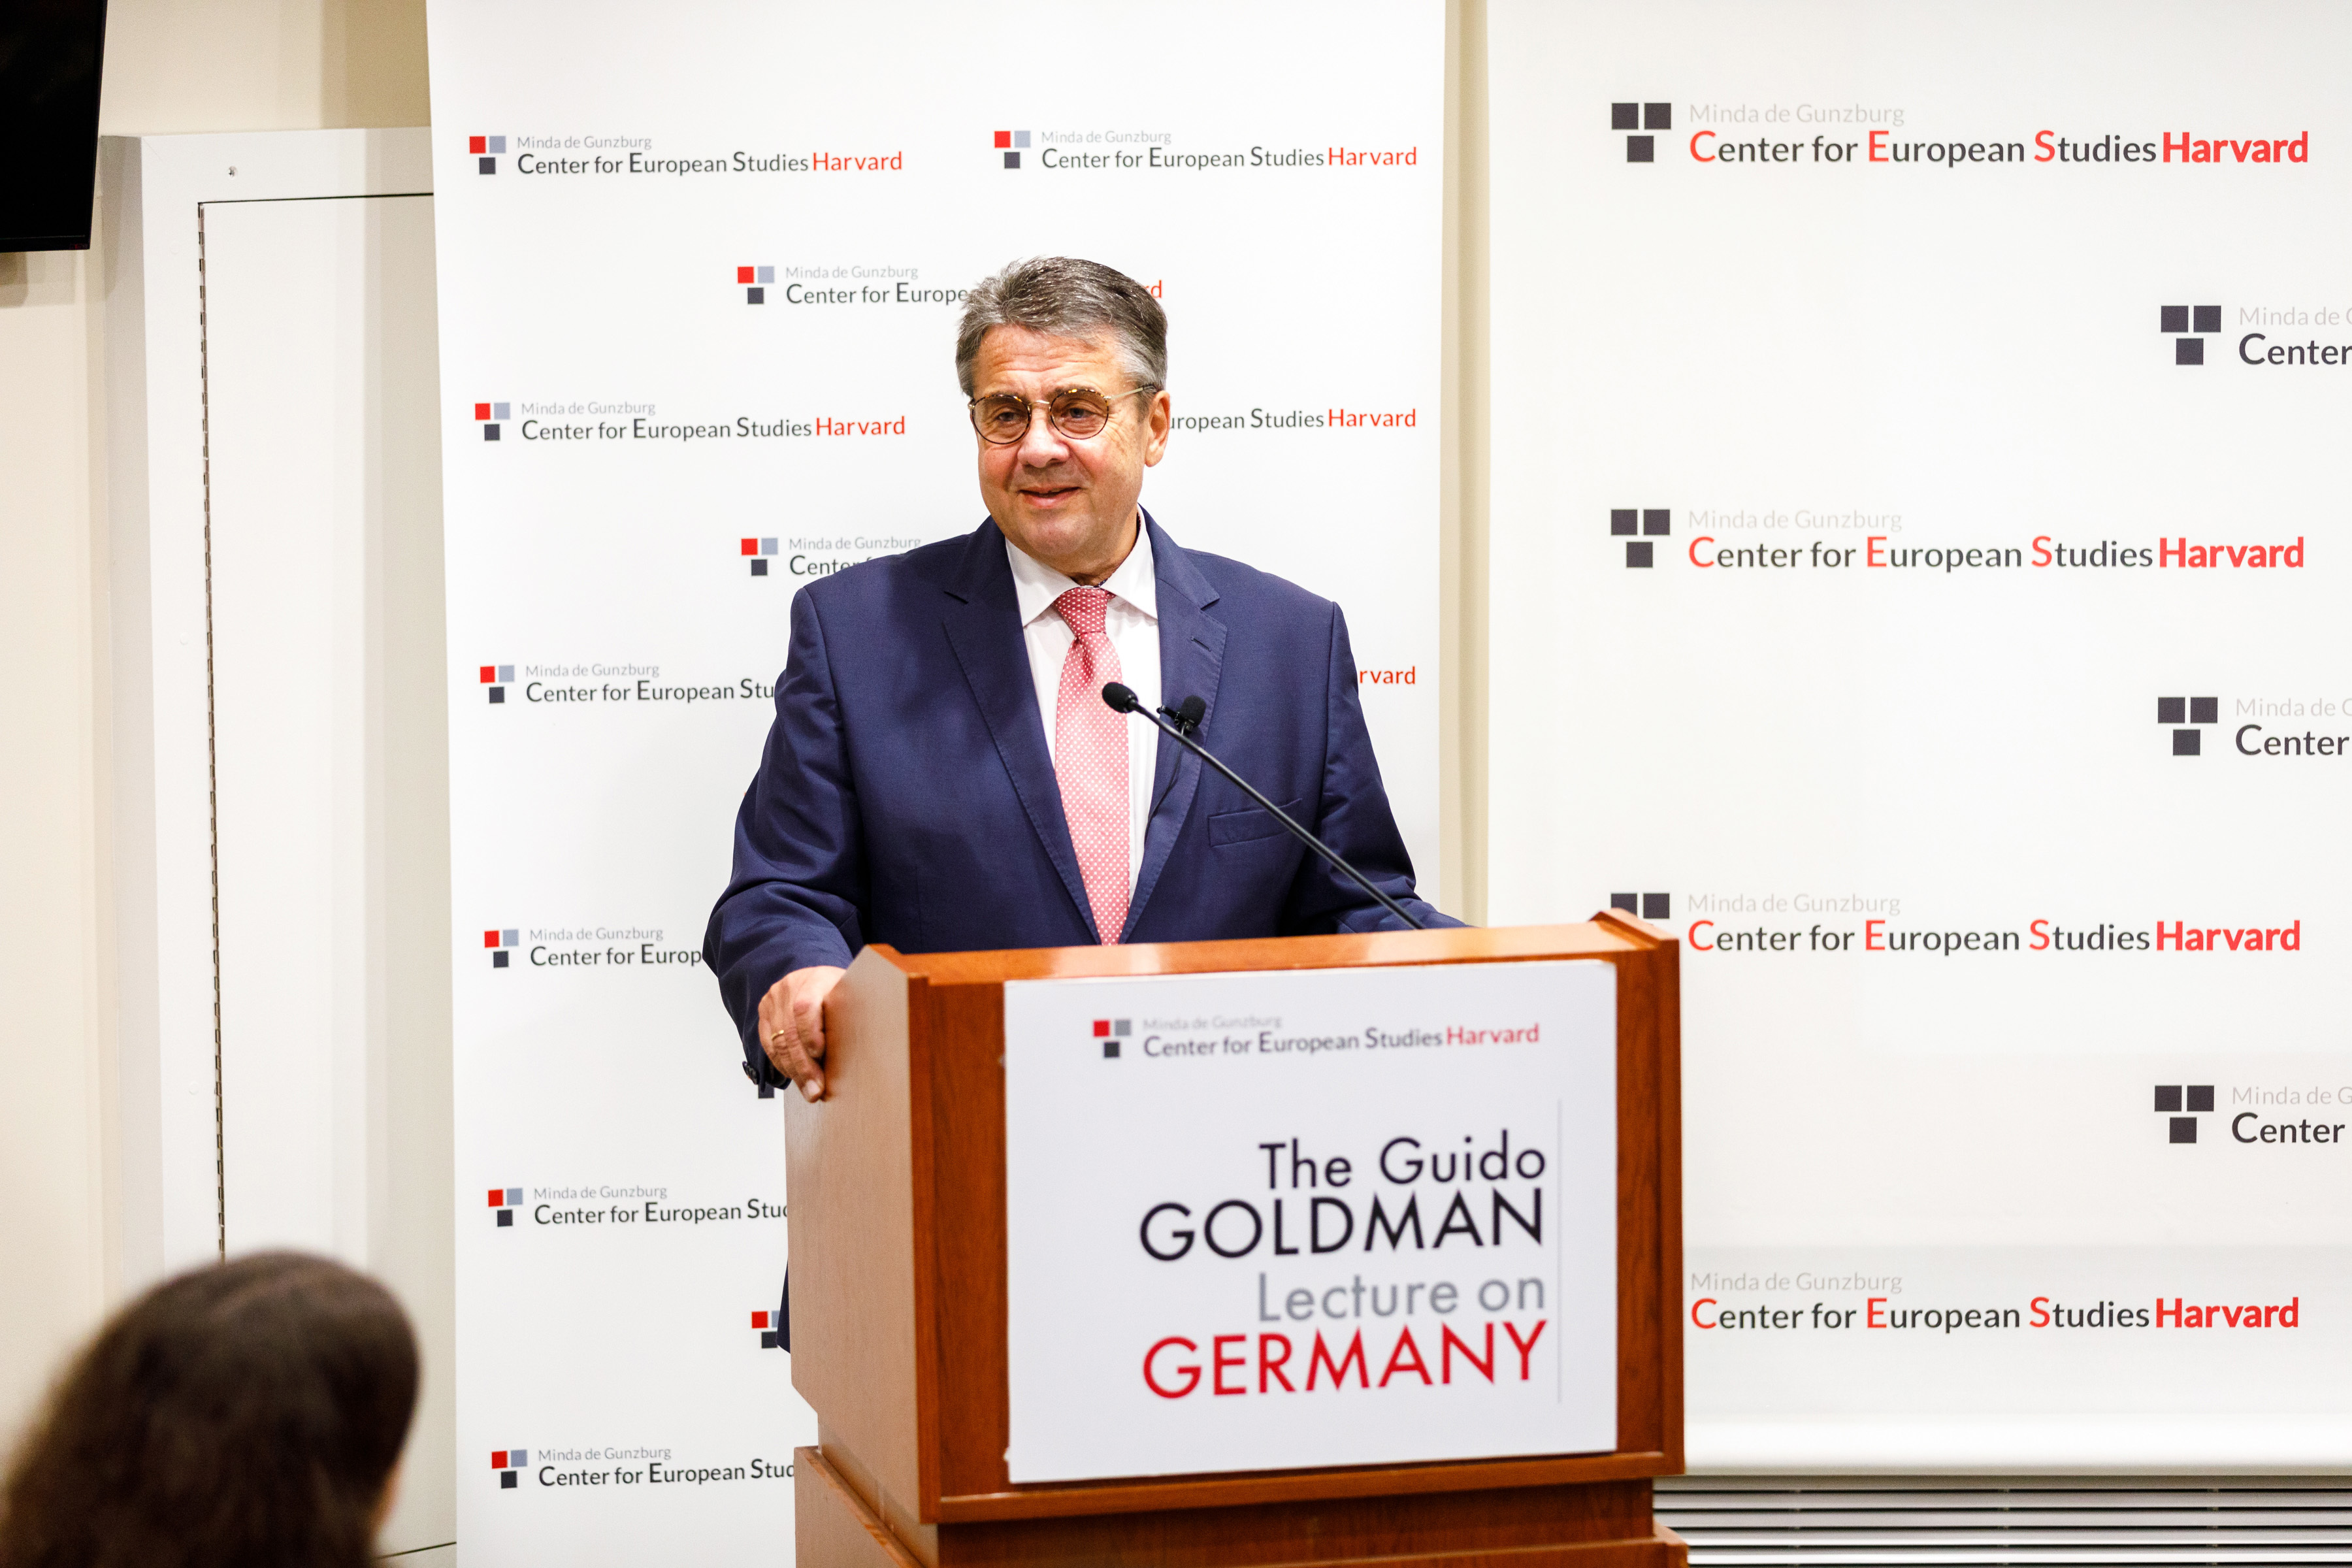 Sigmar Gabriel was the inaugural speaker of the Guido Goldman Lecture on Germany on November 1, 2018.